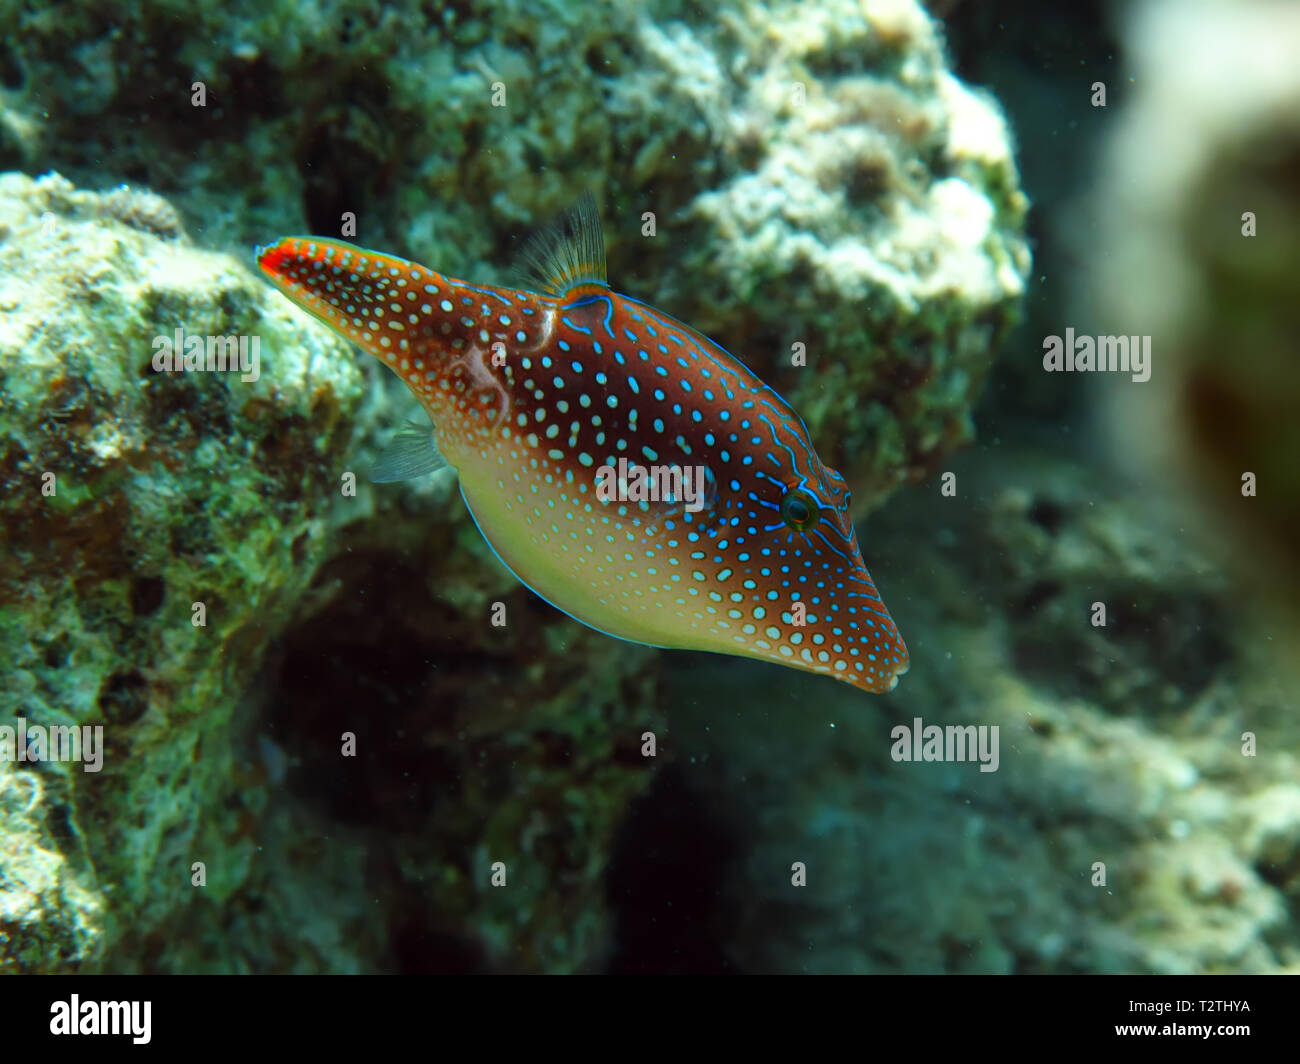 Red Sea Toby ( Canthigaster margaritata) Taken in Red Sea, Egypt. Stock Photo